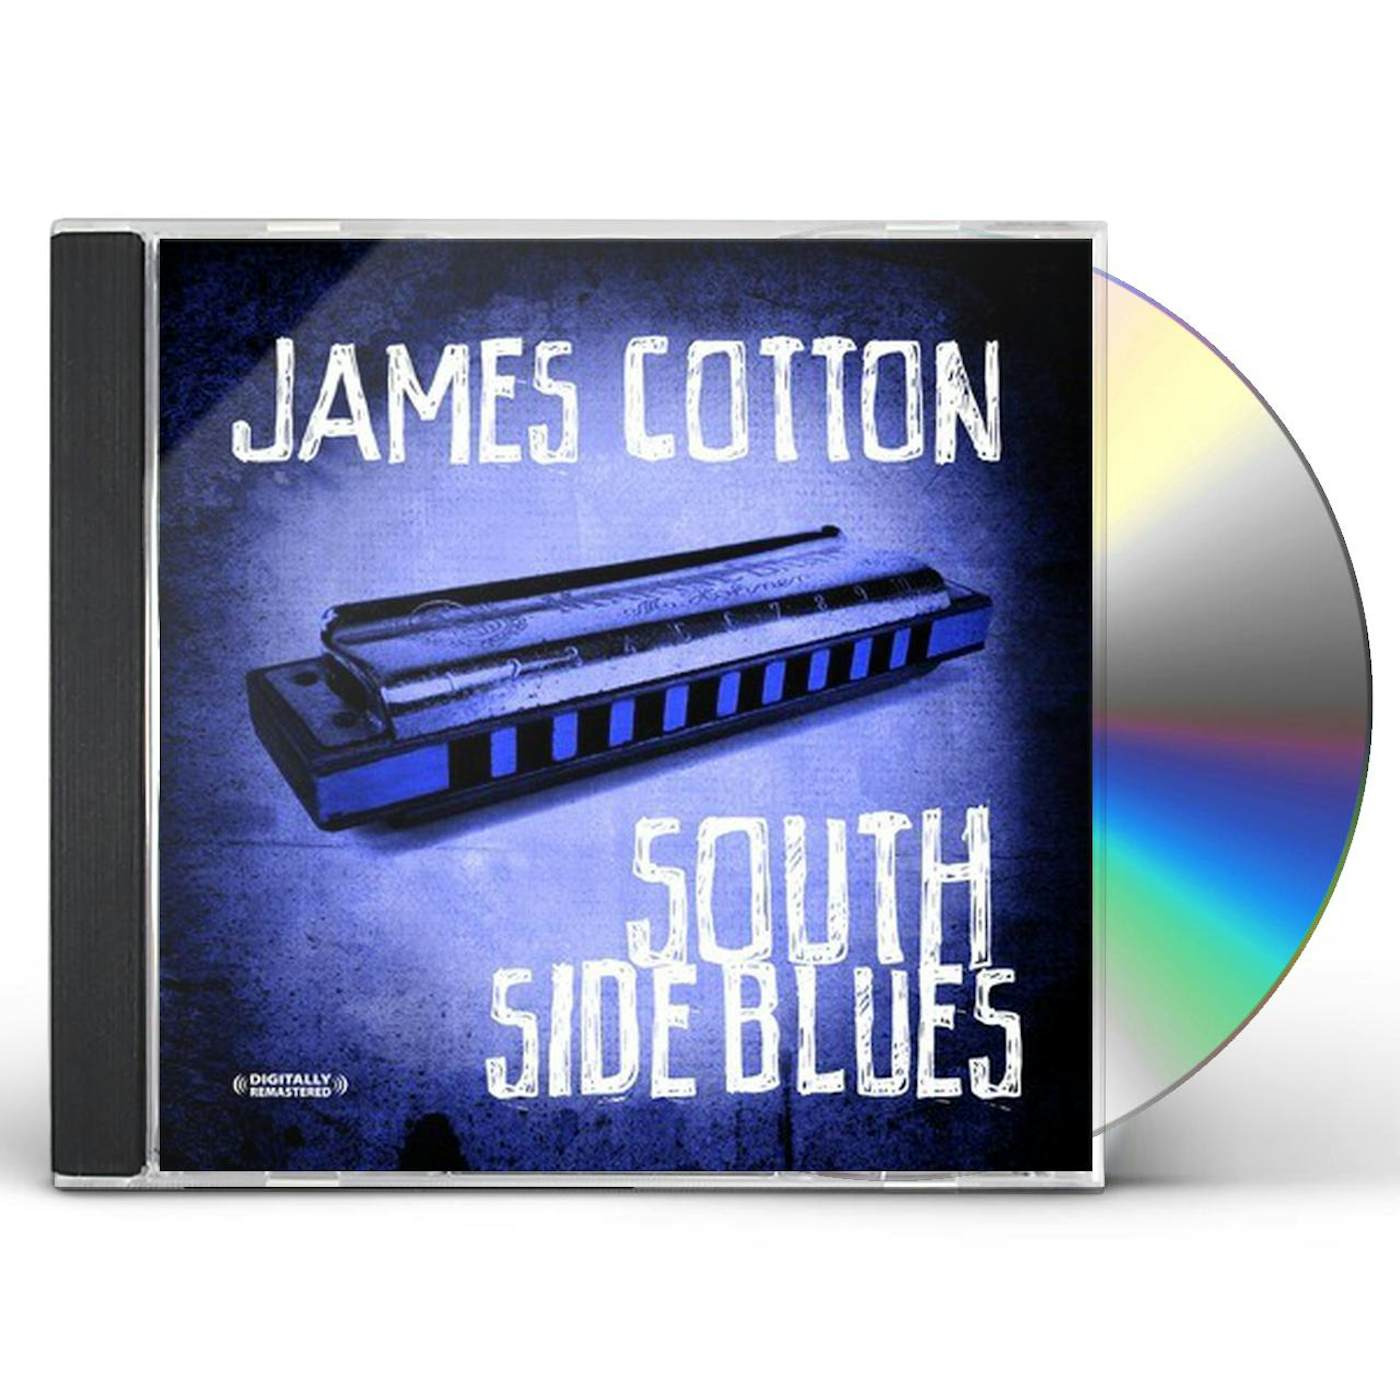 James Cotton SOUTH SIDE BOOGIE & OTHER FAVORITES CD